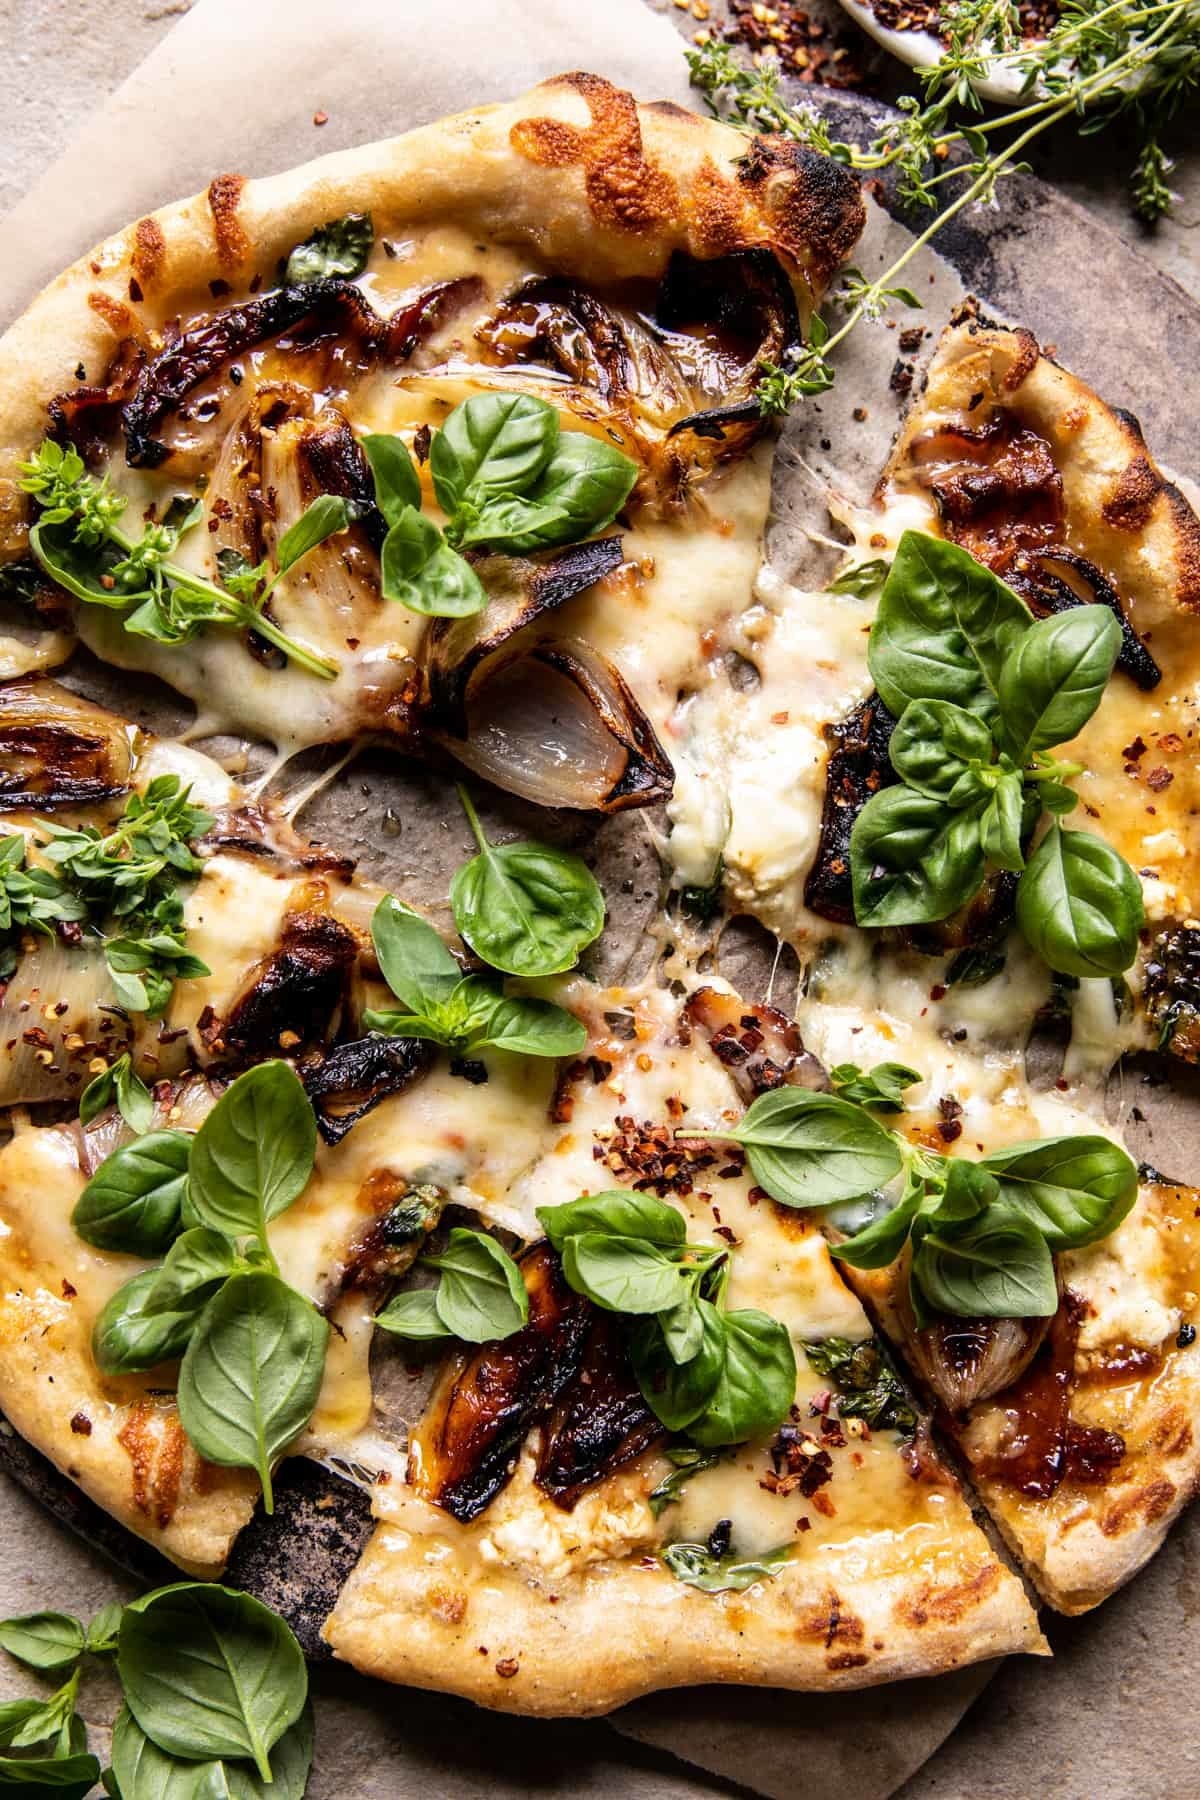 A caramelized onion pizza with basil.